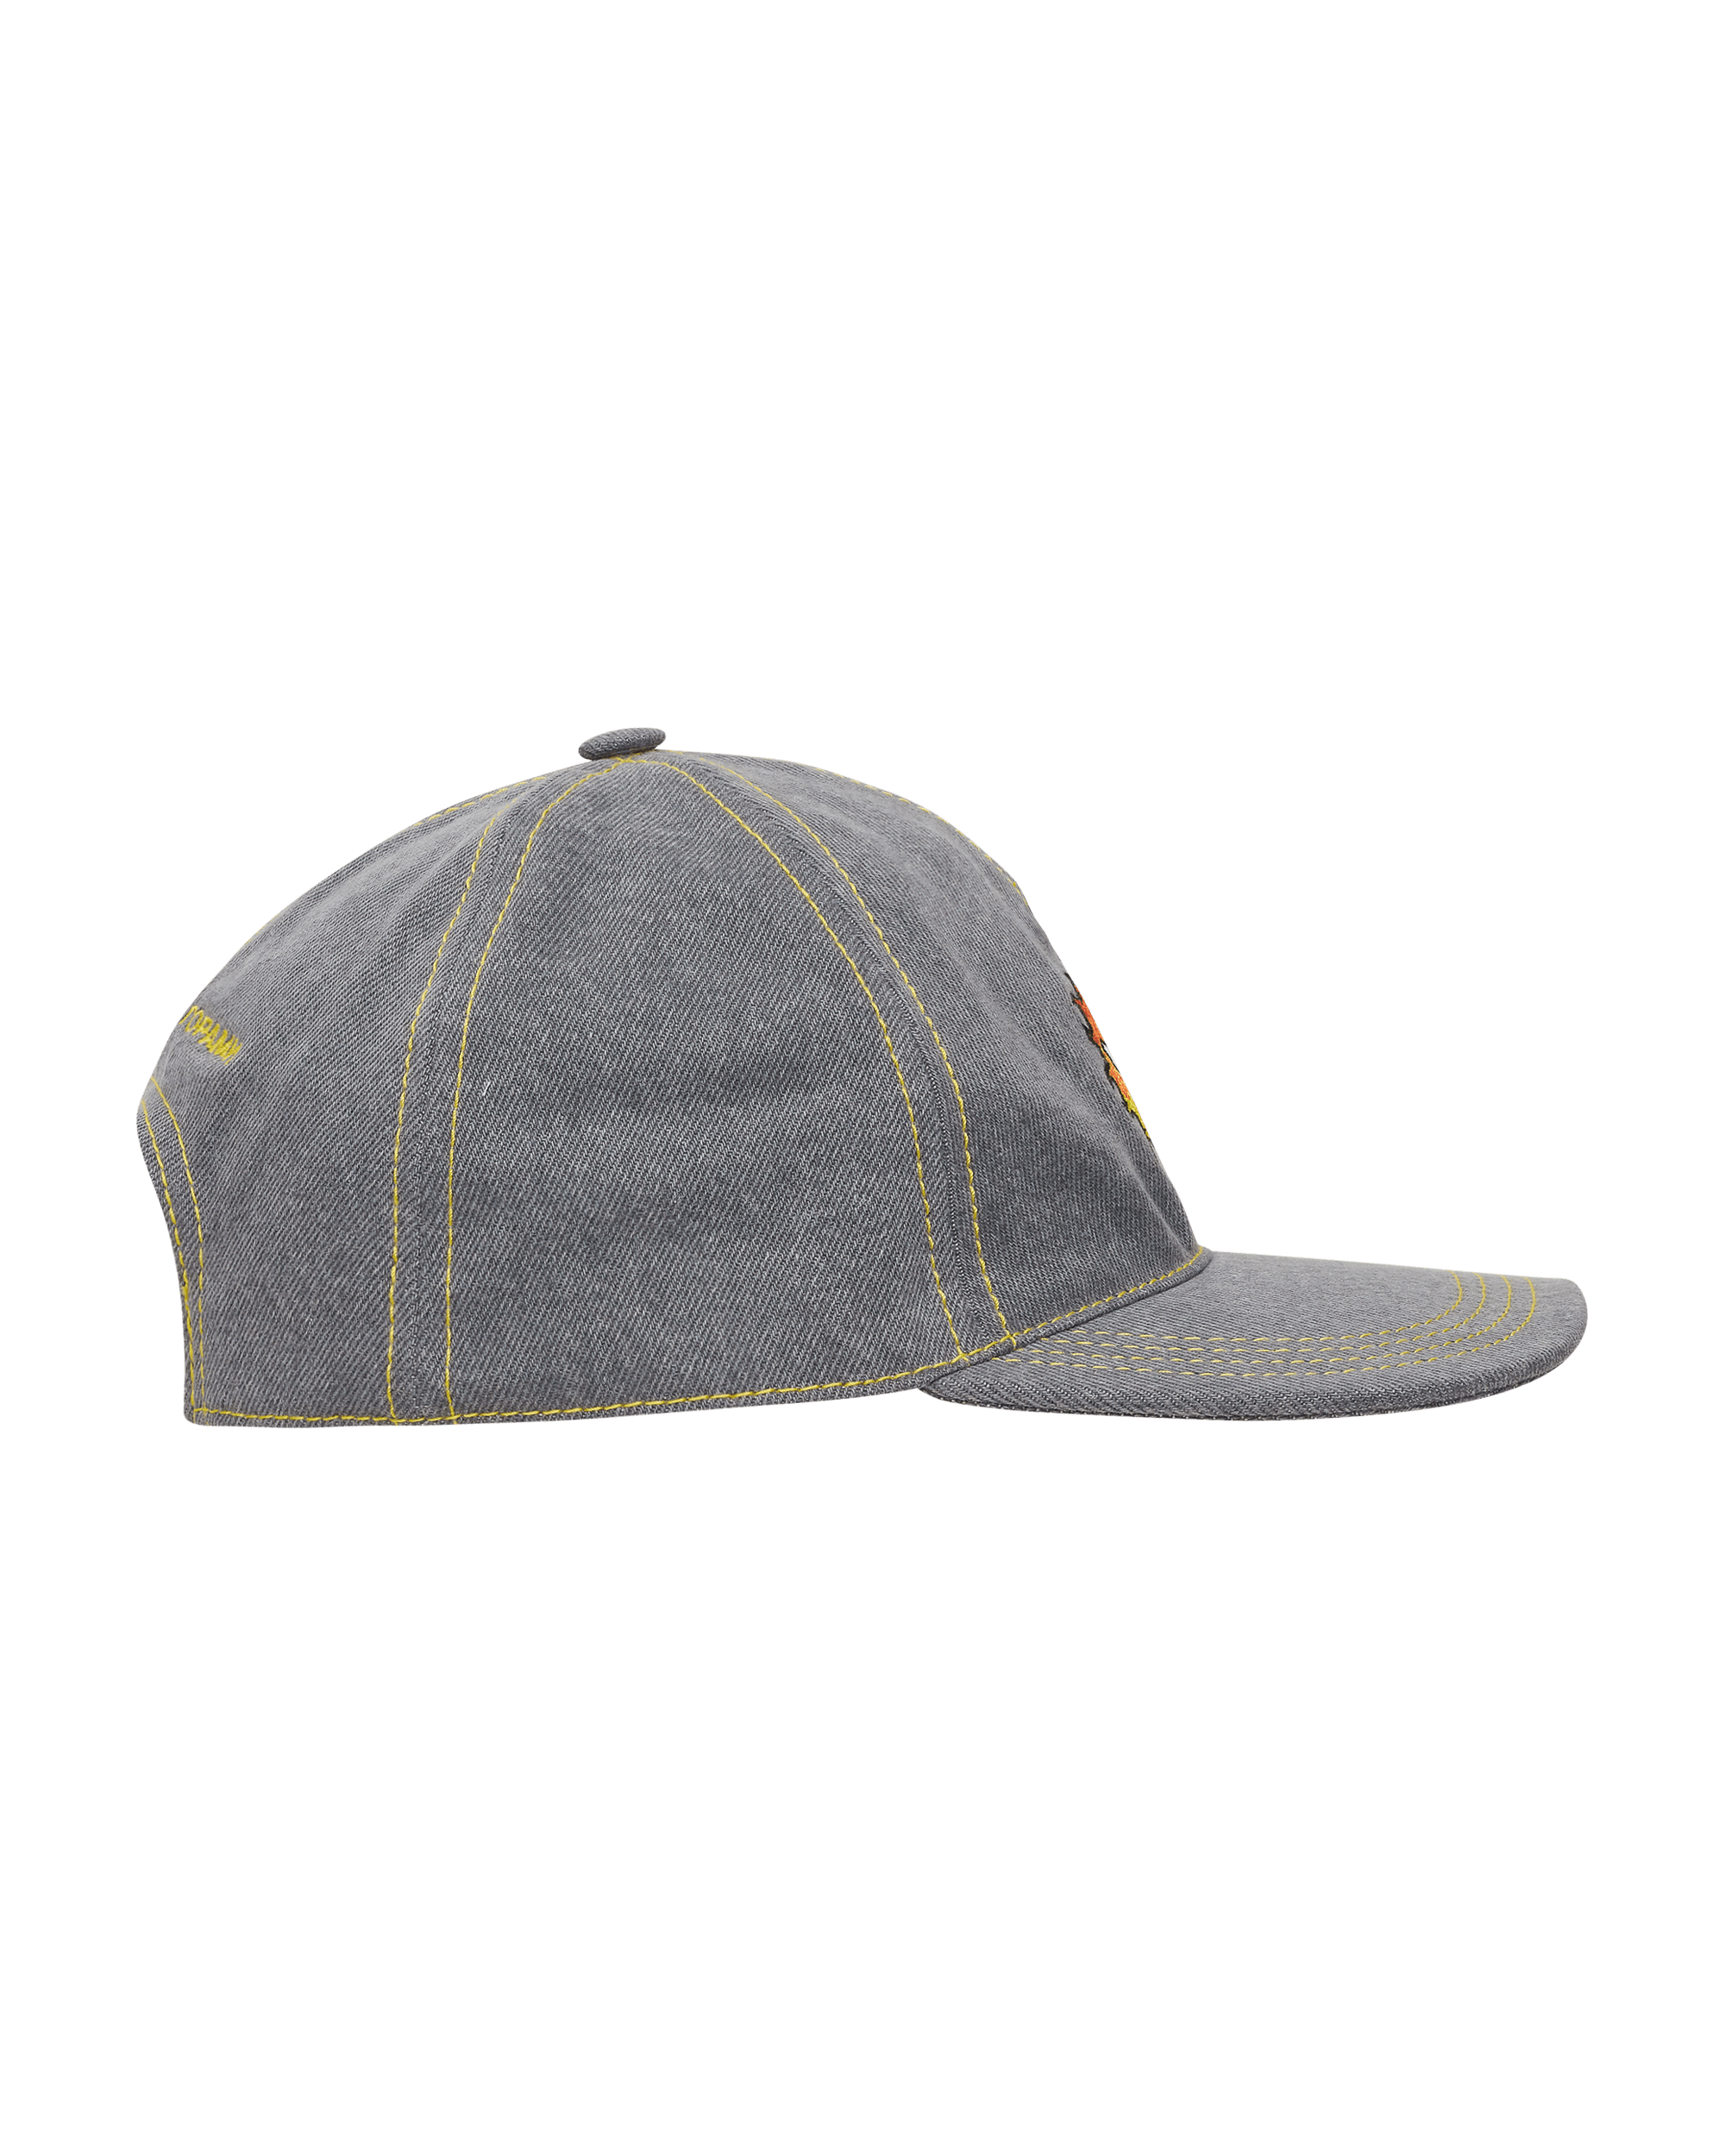 Paccbet Embroidery Light Grey Hats Caps PACC8K005 3